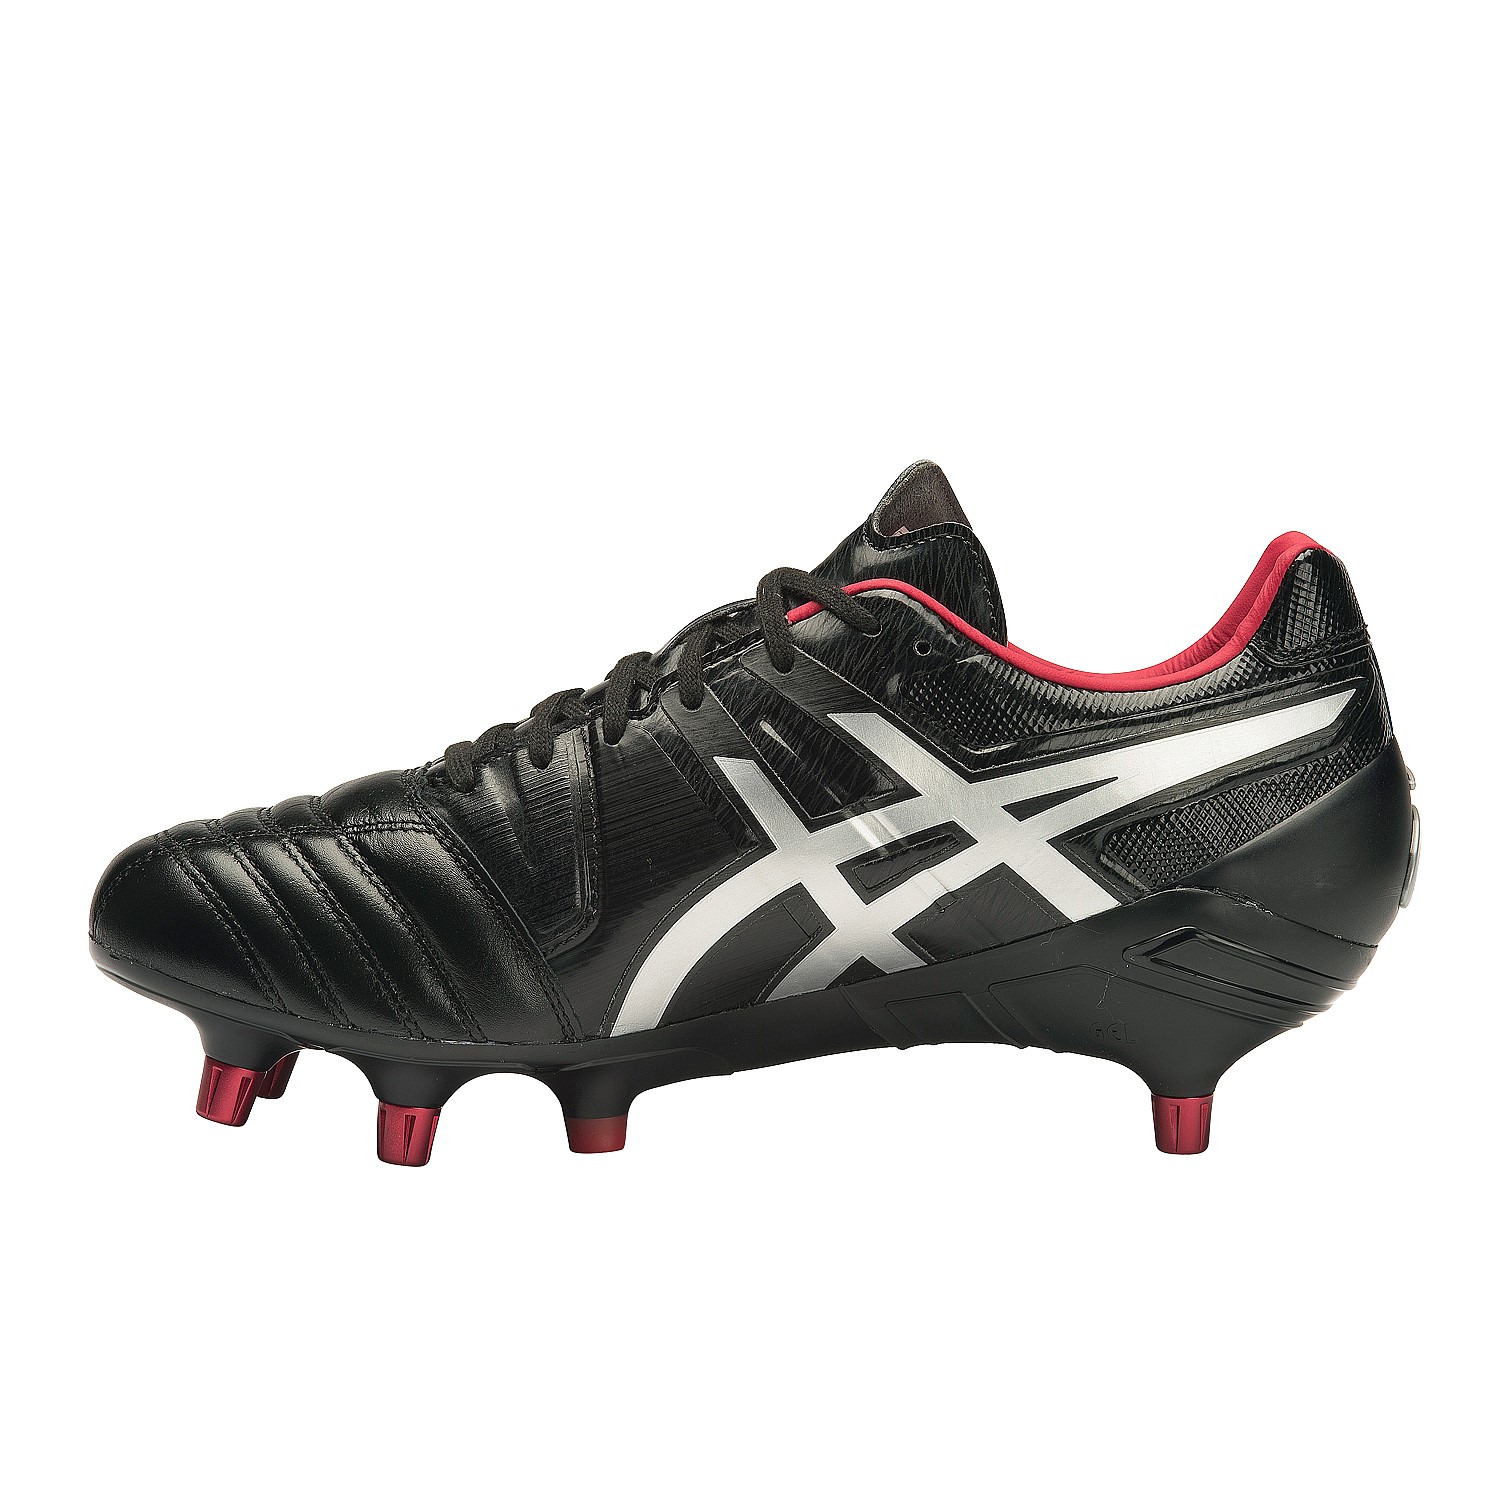 gel lethal tight five sg rugby boots